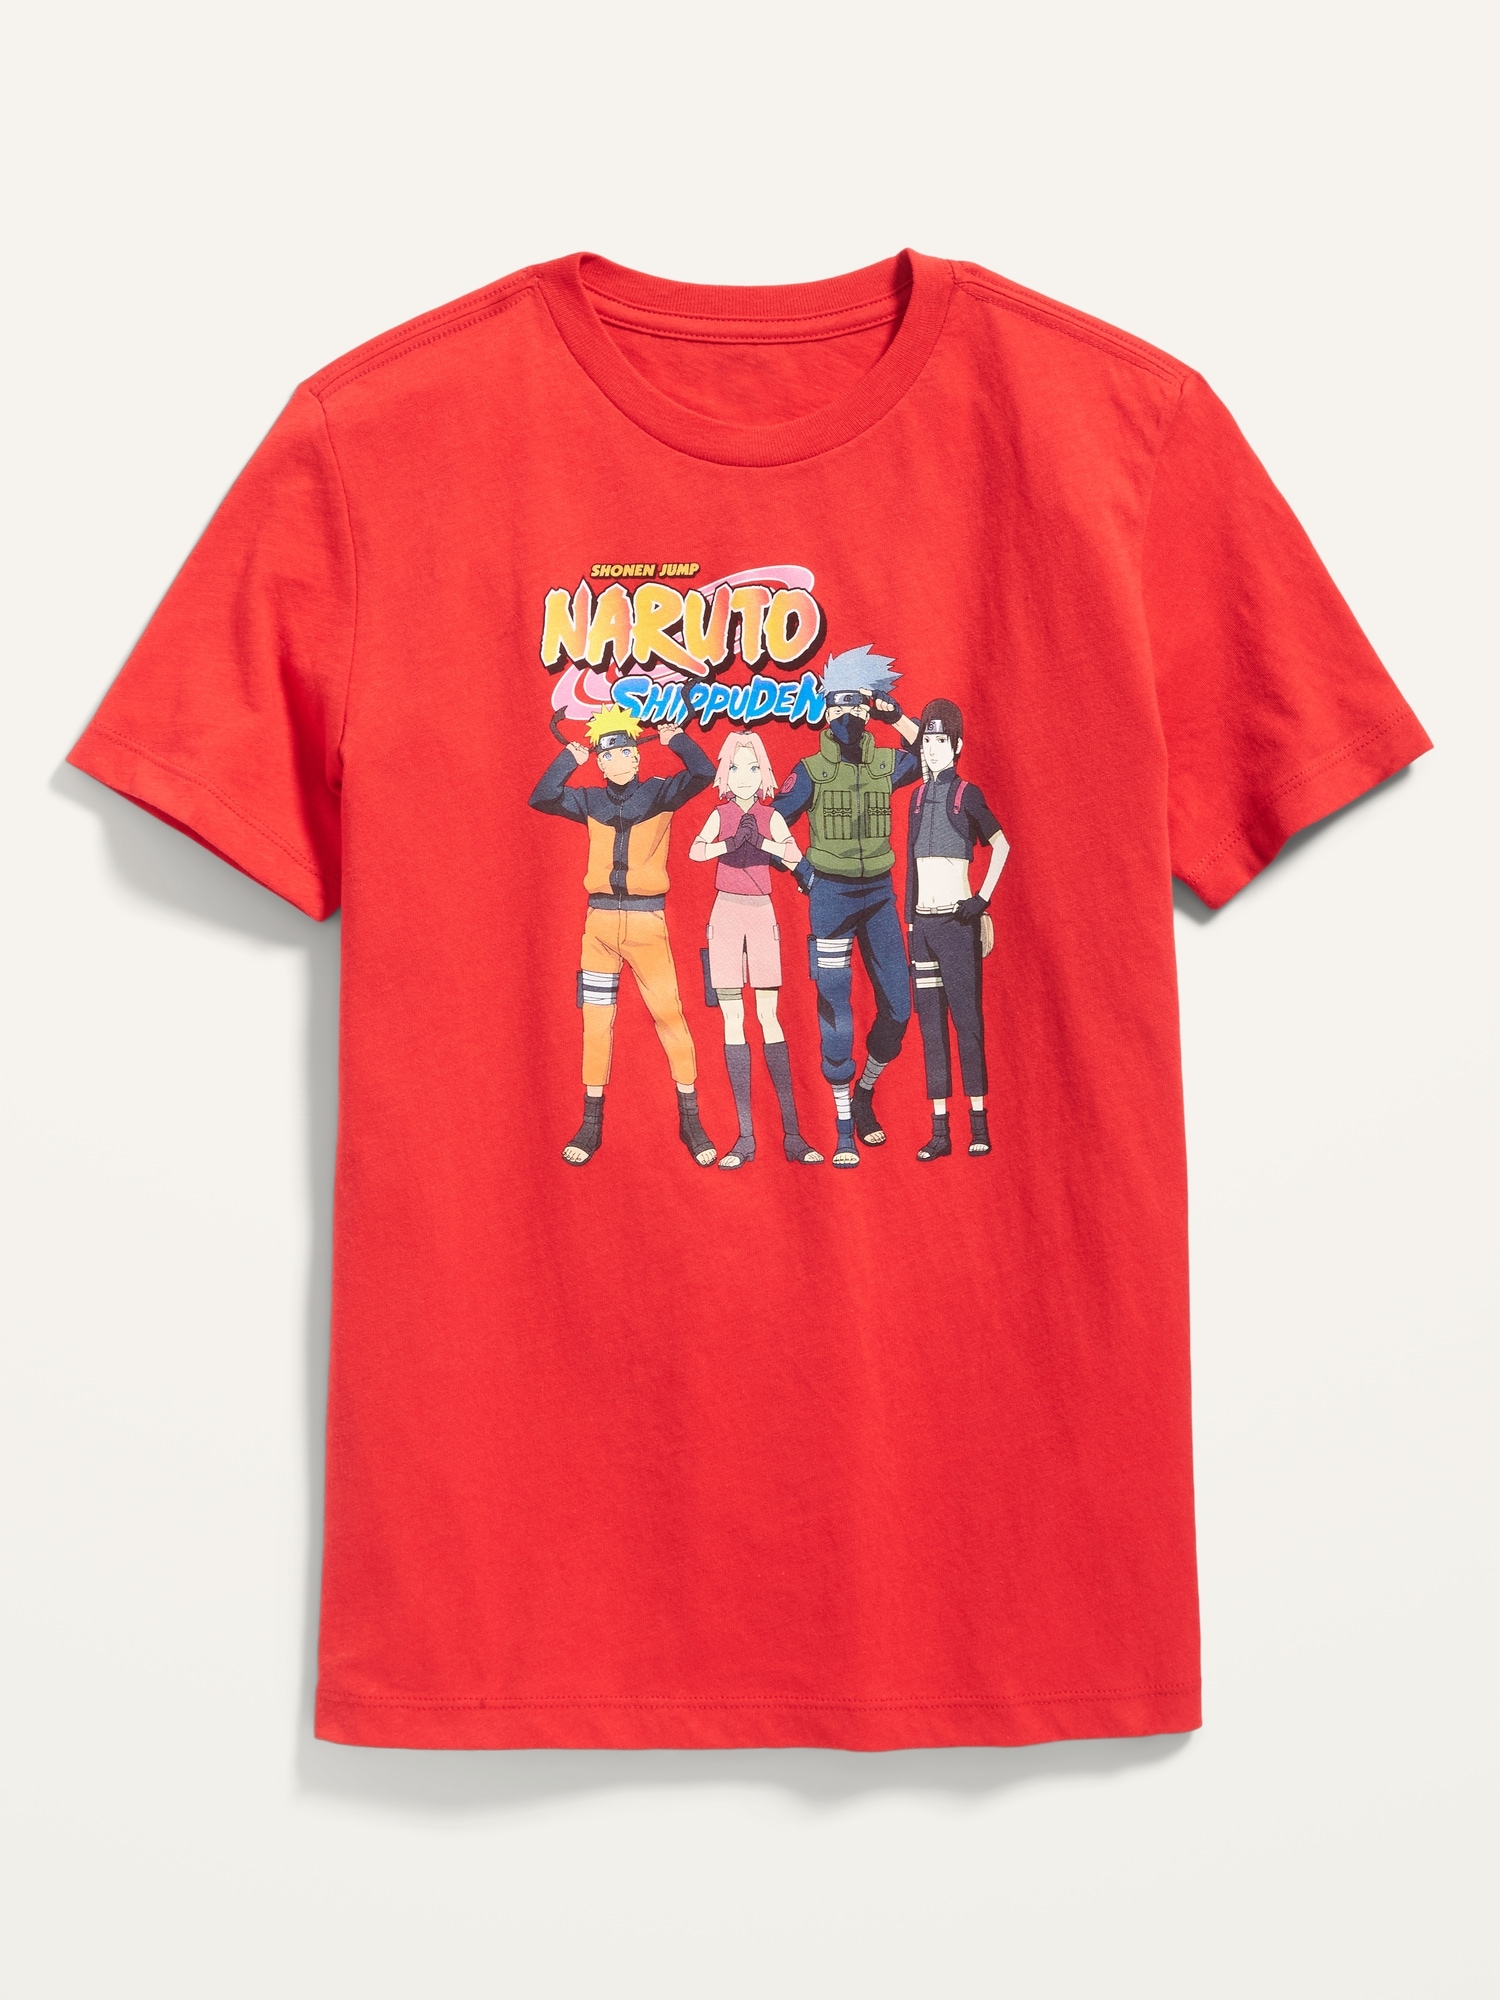 Buy > graphic tees naruto > in stock